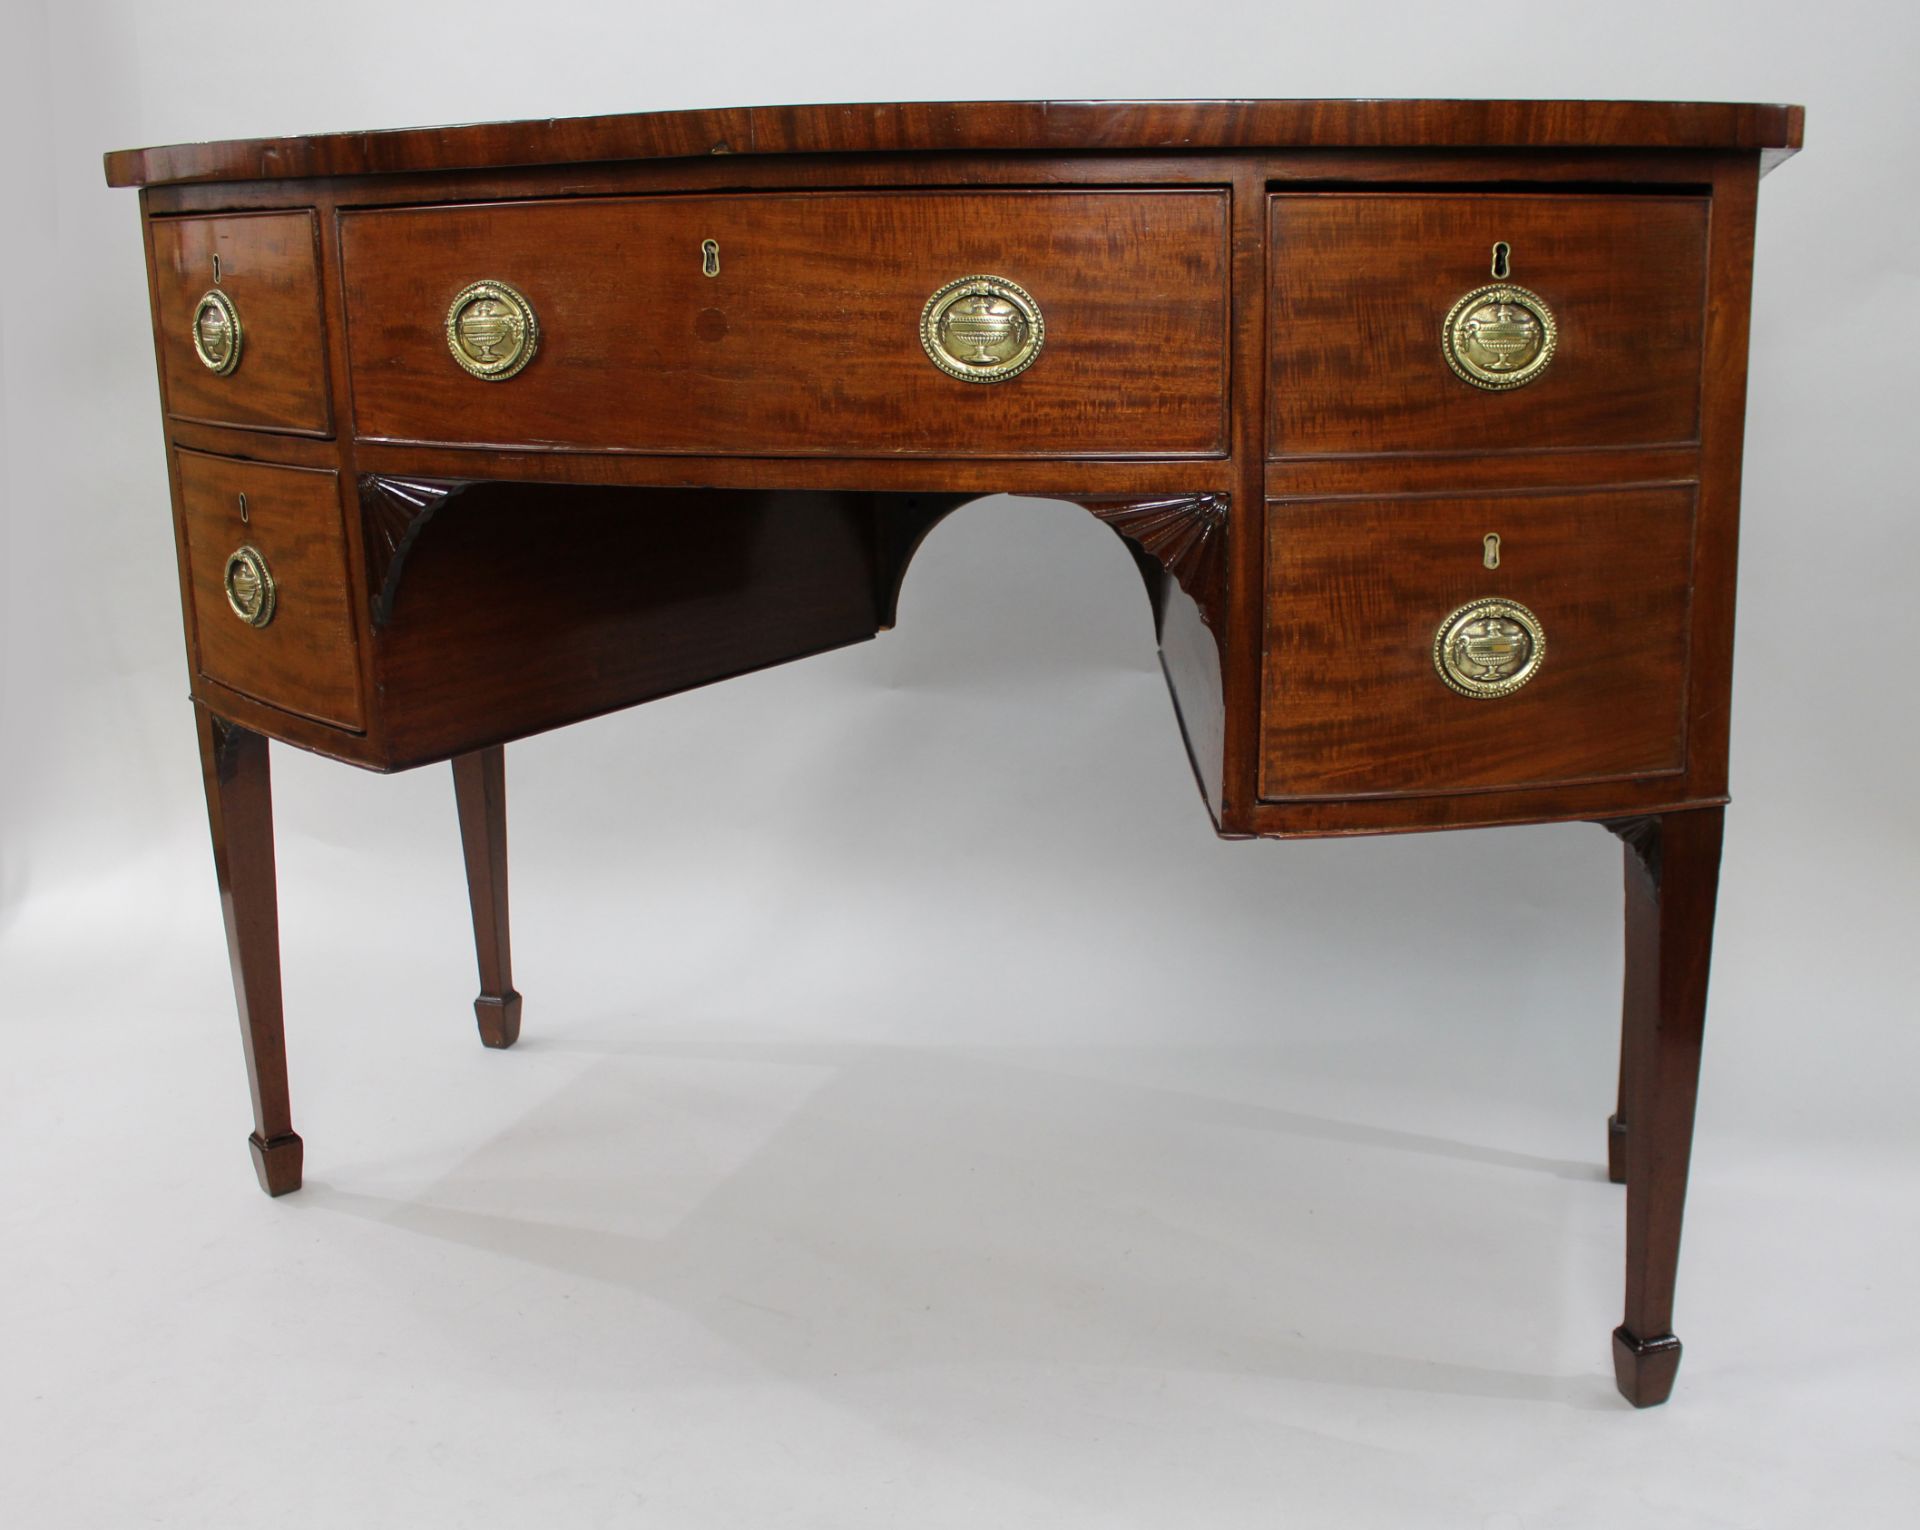 George III Mahogany Bow Fronted Serving Table - Image 5 of 8